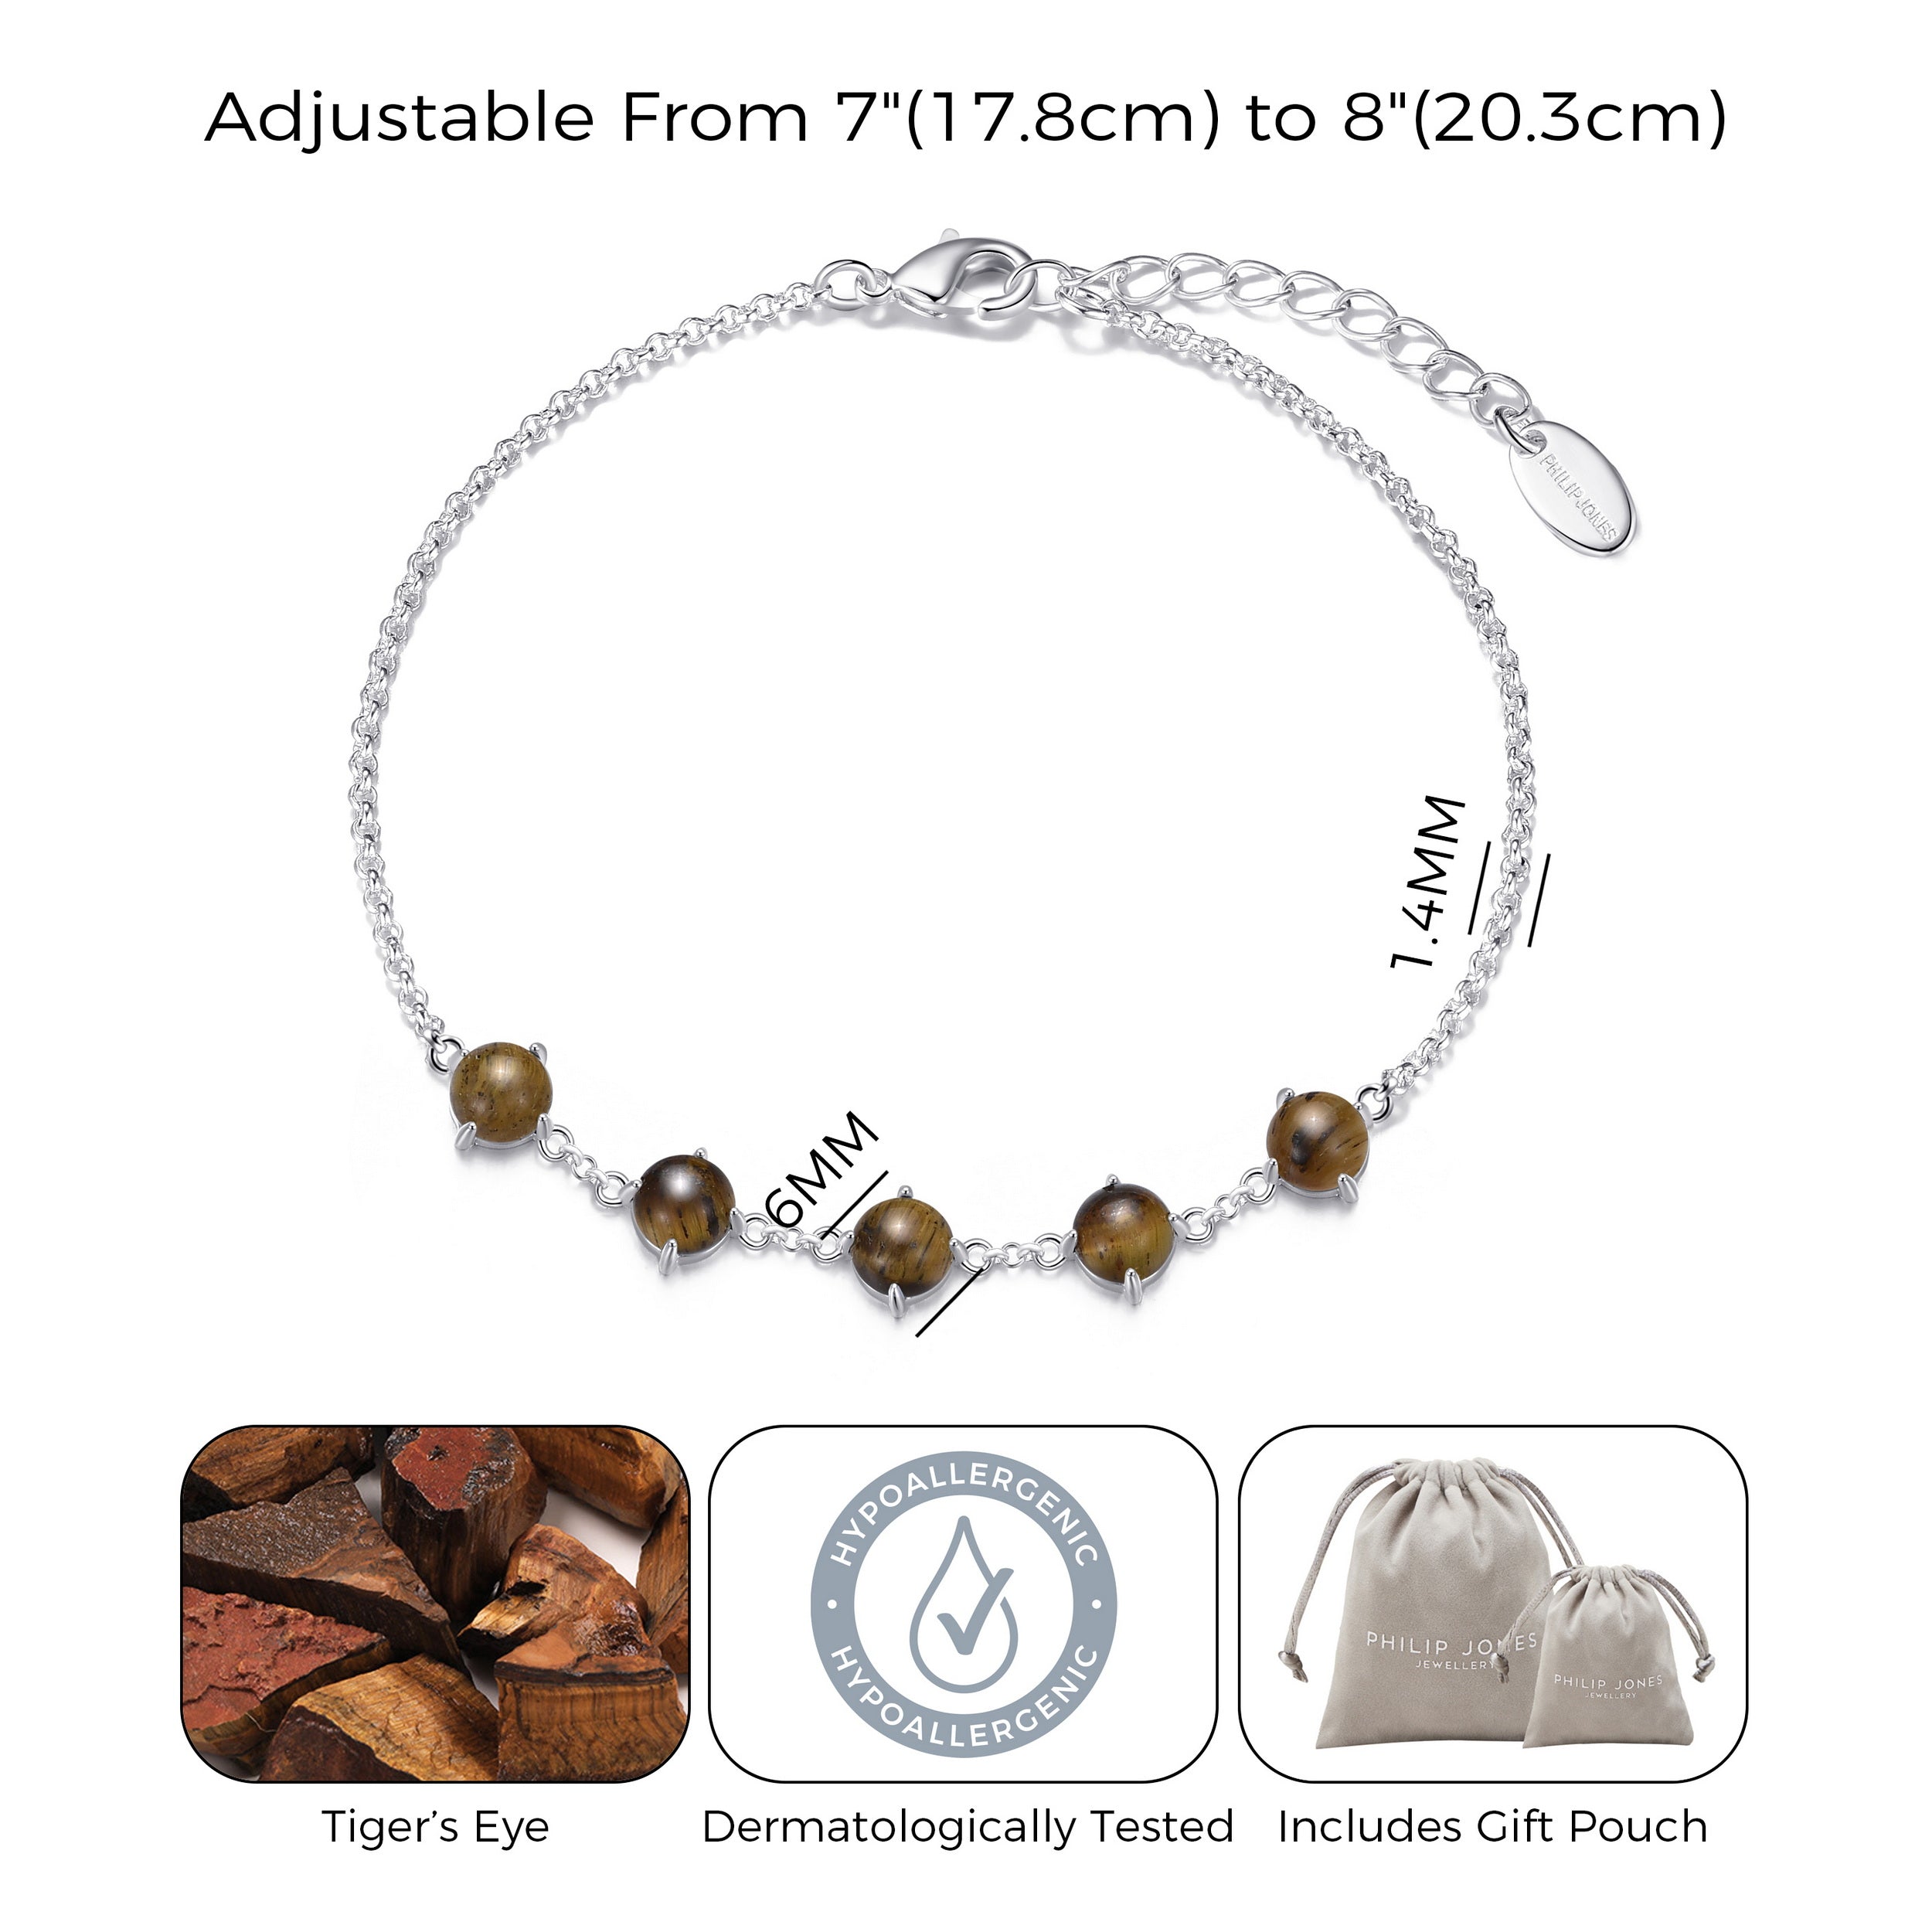 Tiger's Eye Gemstone Bracelet with Quote Card